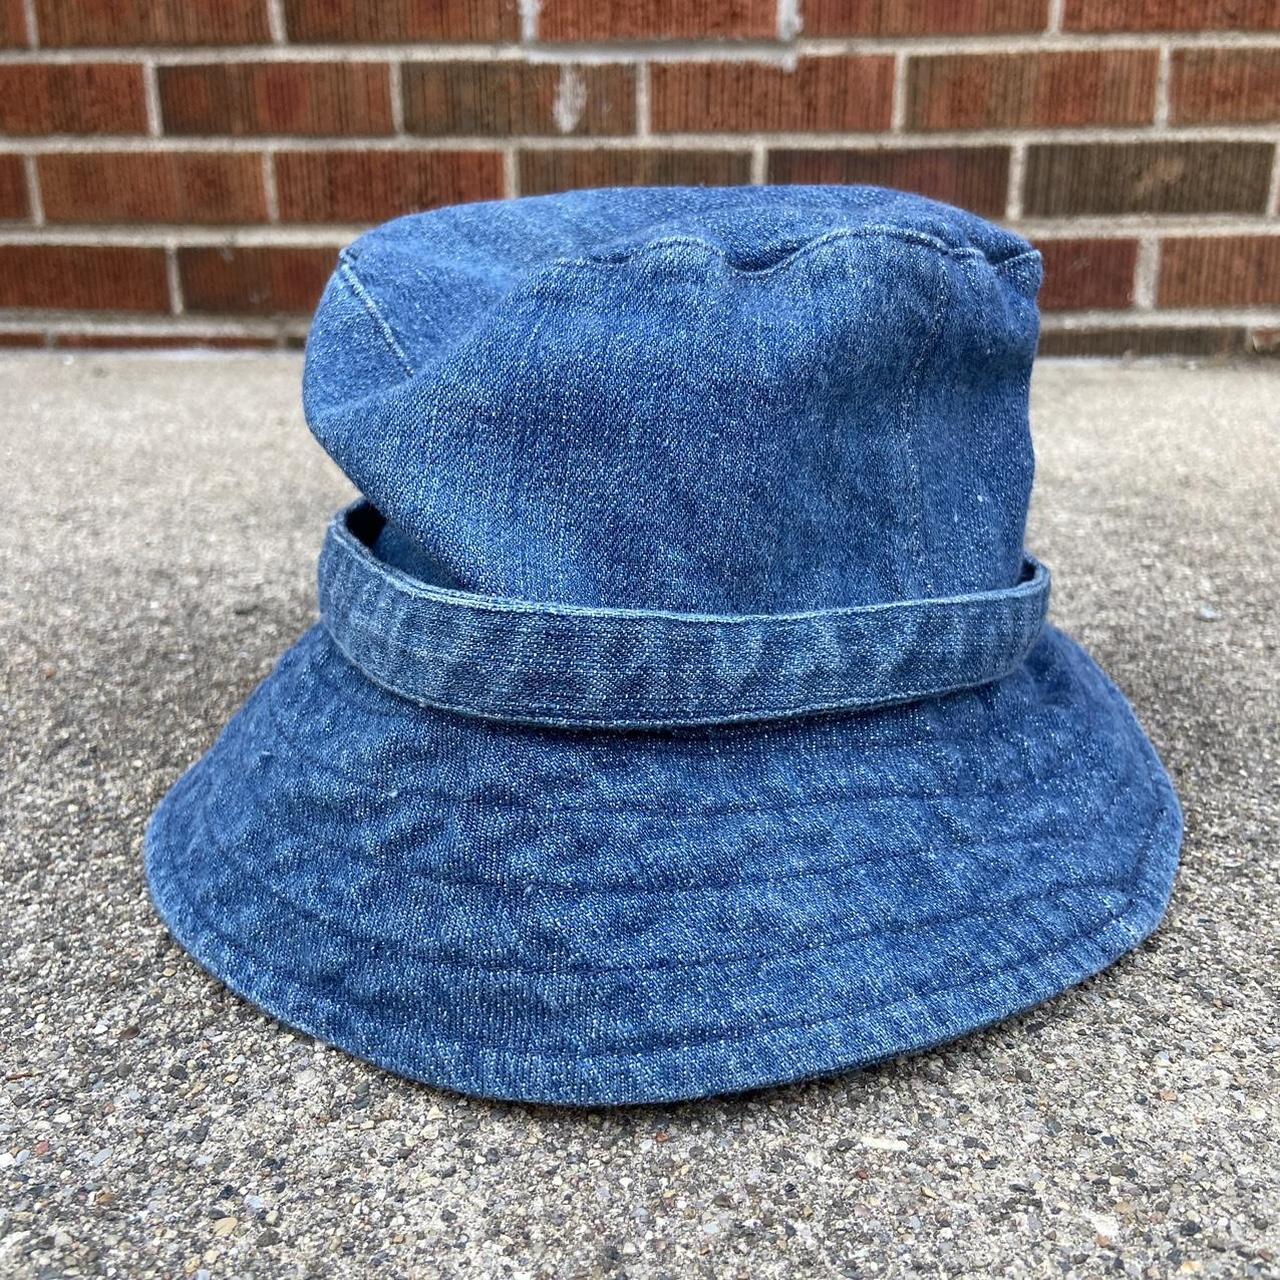 The Bucket Hat Is The '90s Fashion Trend We Can't Shake Off